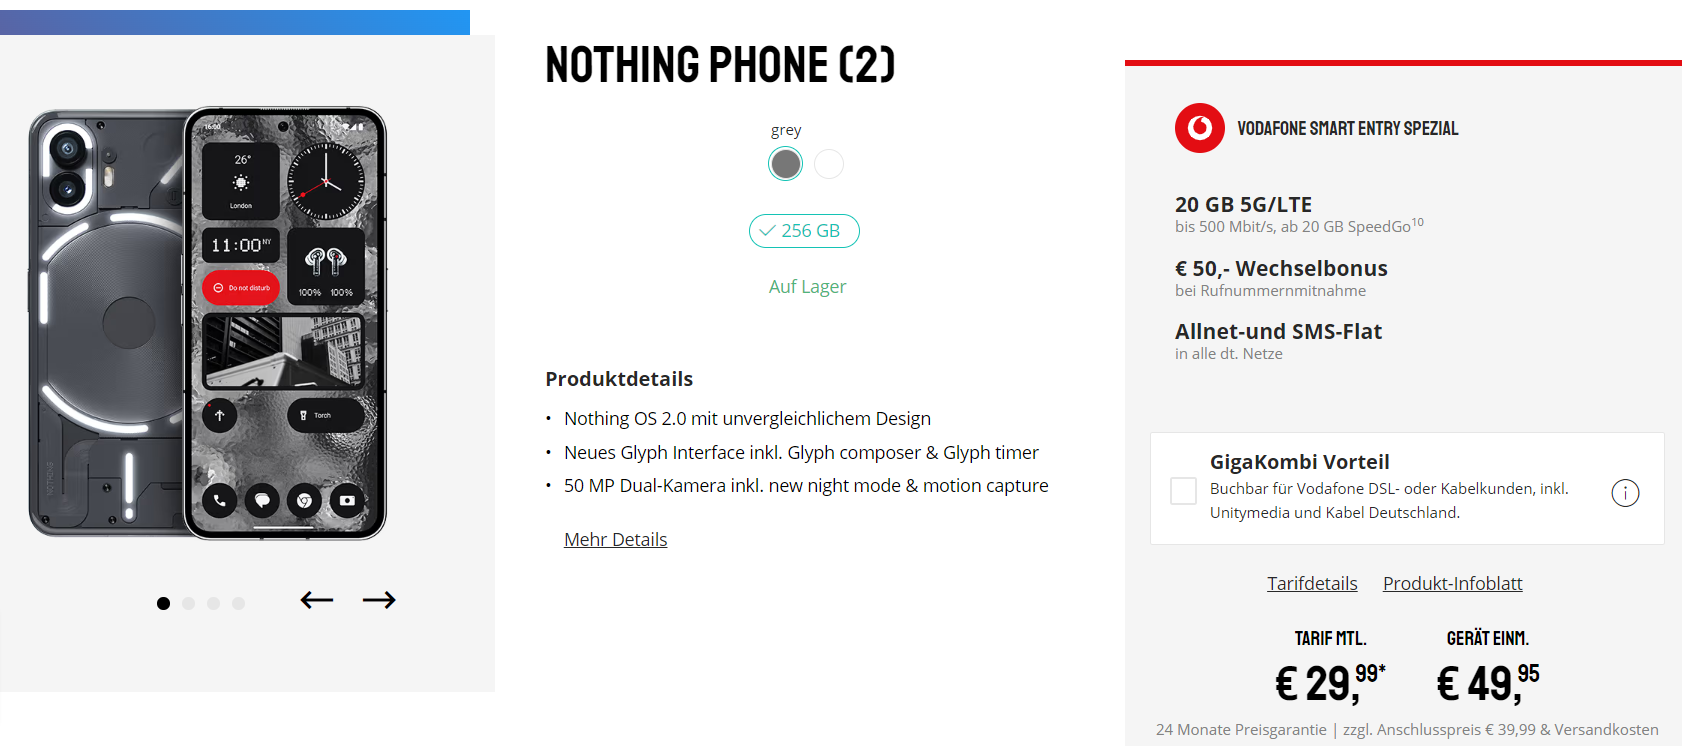 Nothing Phone 2 + Vodafone Smart Entry Spezial 20 Gb 5G